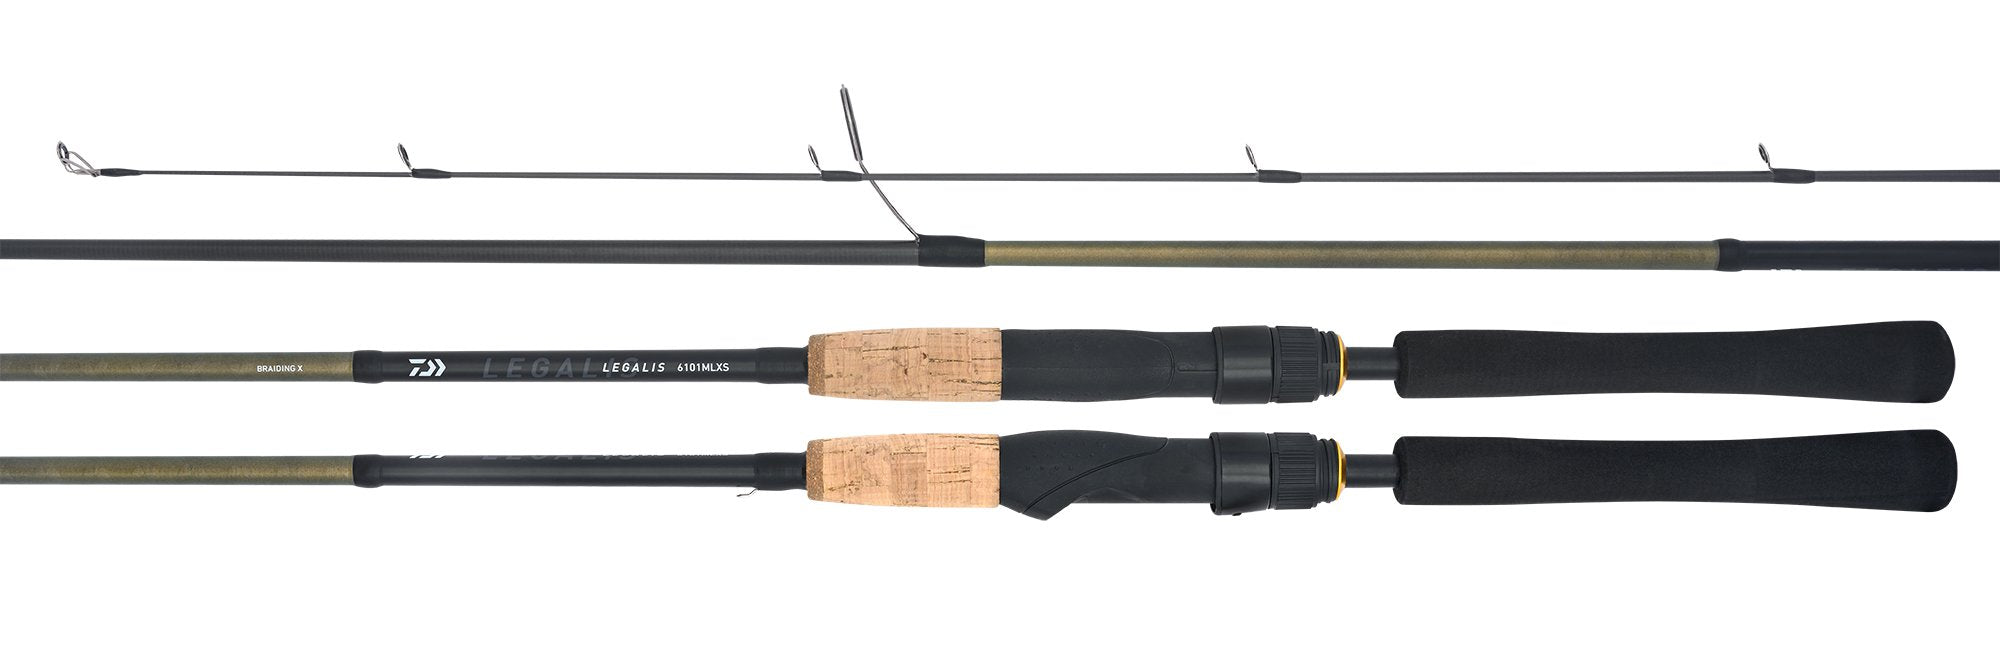 Daiwa Legalis 702ULFS 2 Piece Spin Rod -  - Mansfield Hunting & Fishing - Products to prepare for Corona Virus